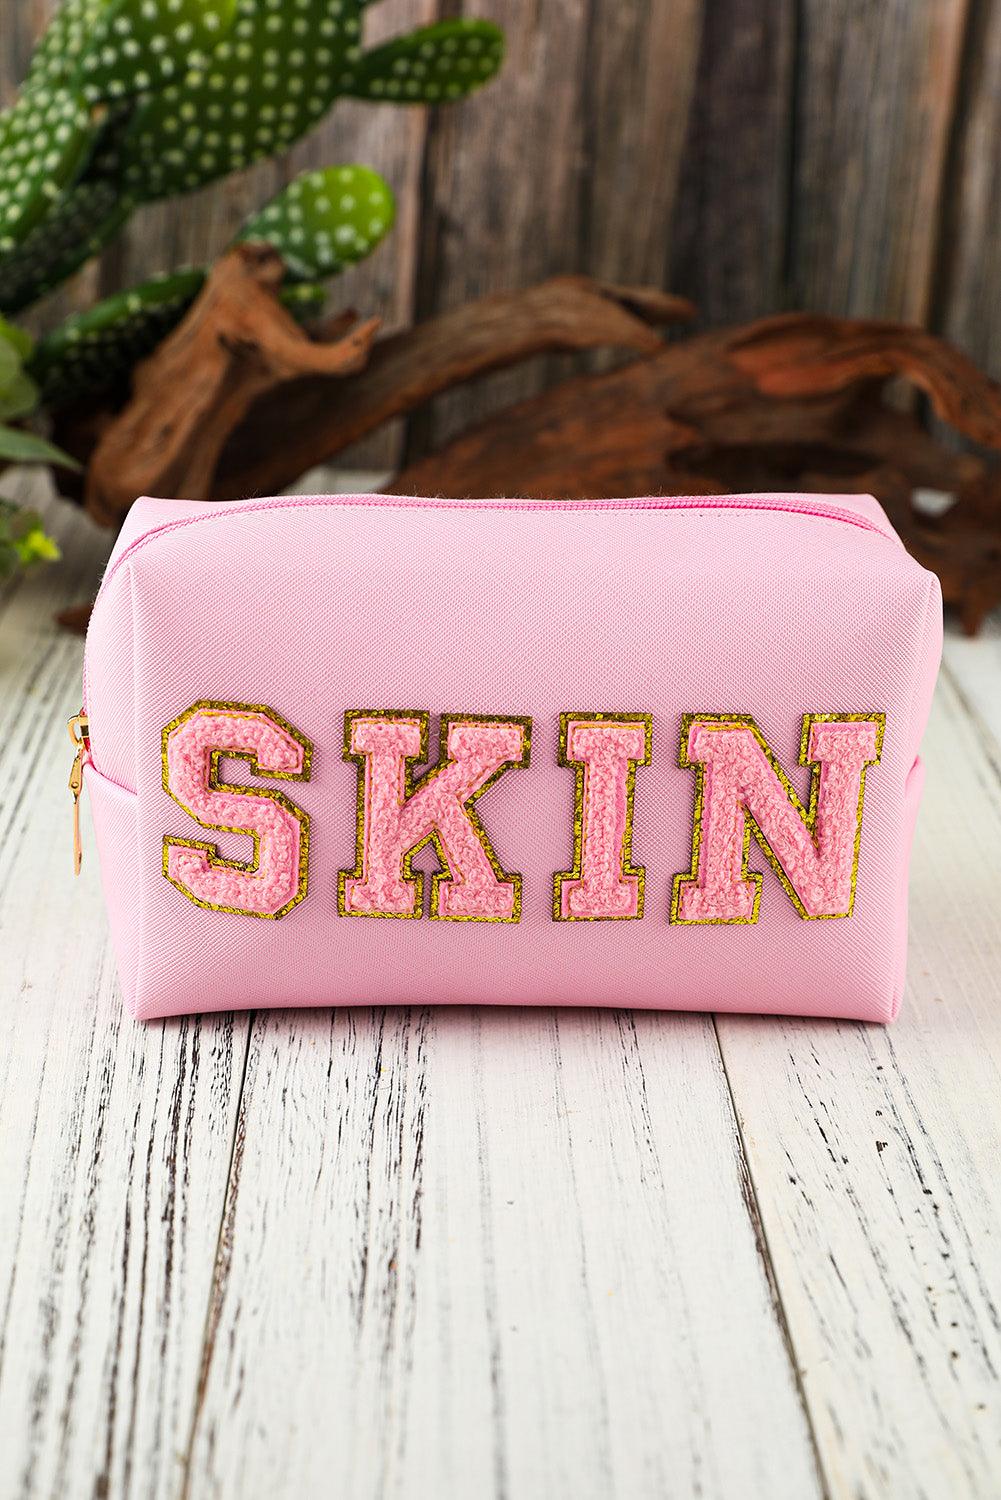 SKIN Embroidered Patch Zipped Cosmetic Bag 19*7*12cm